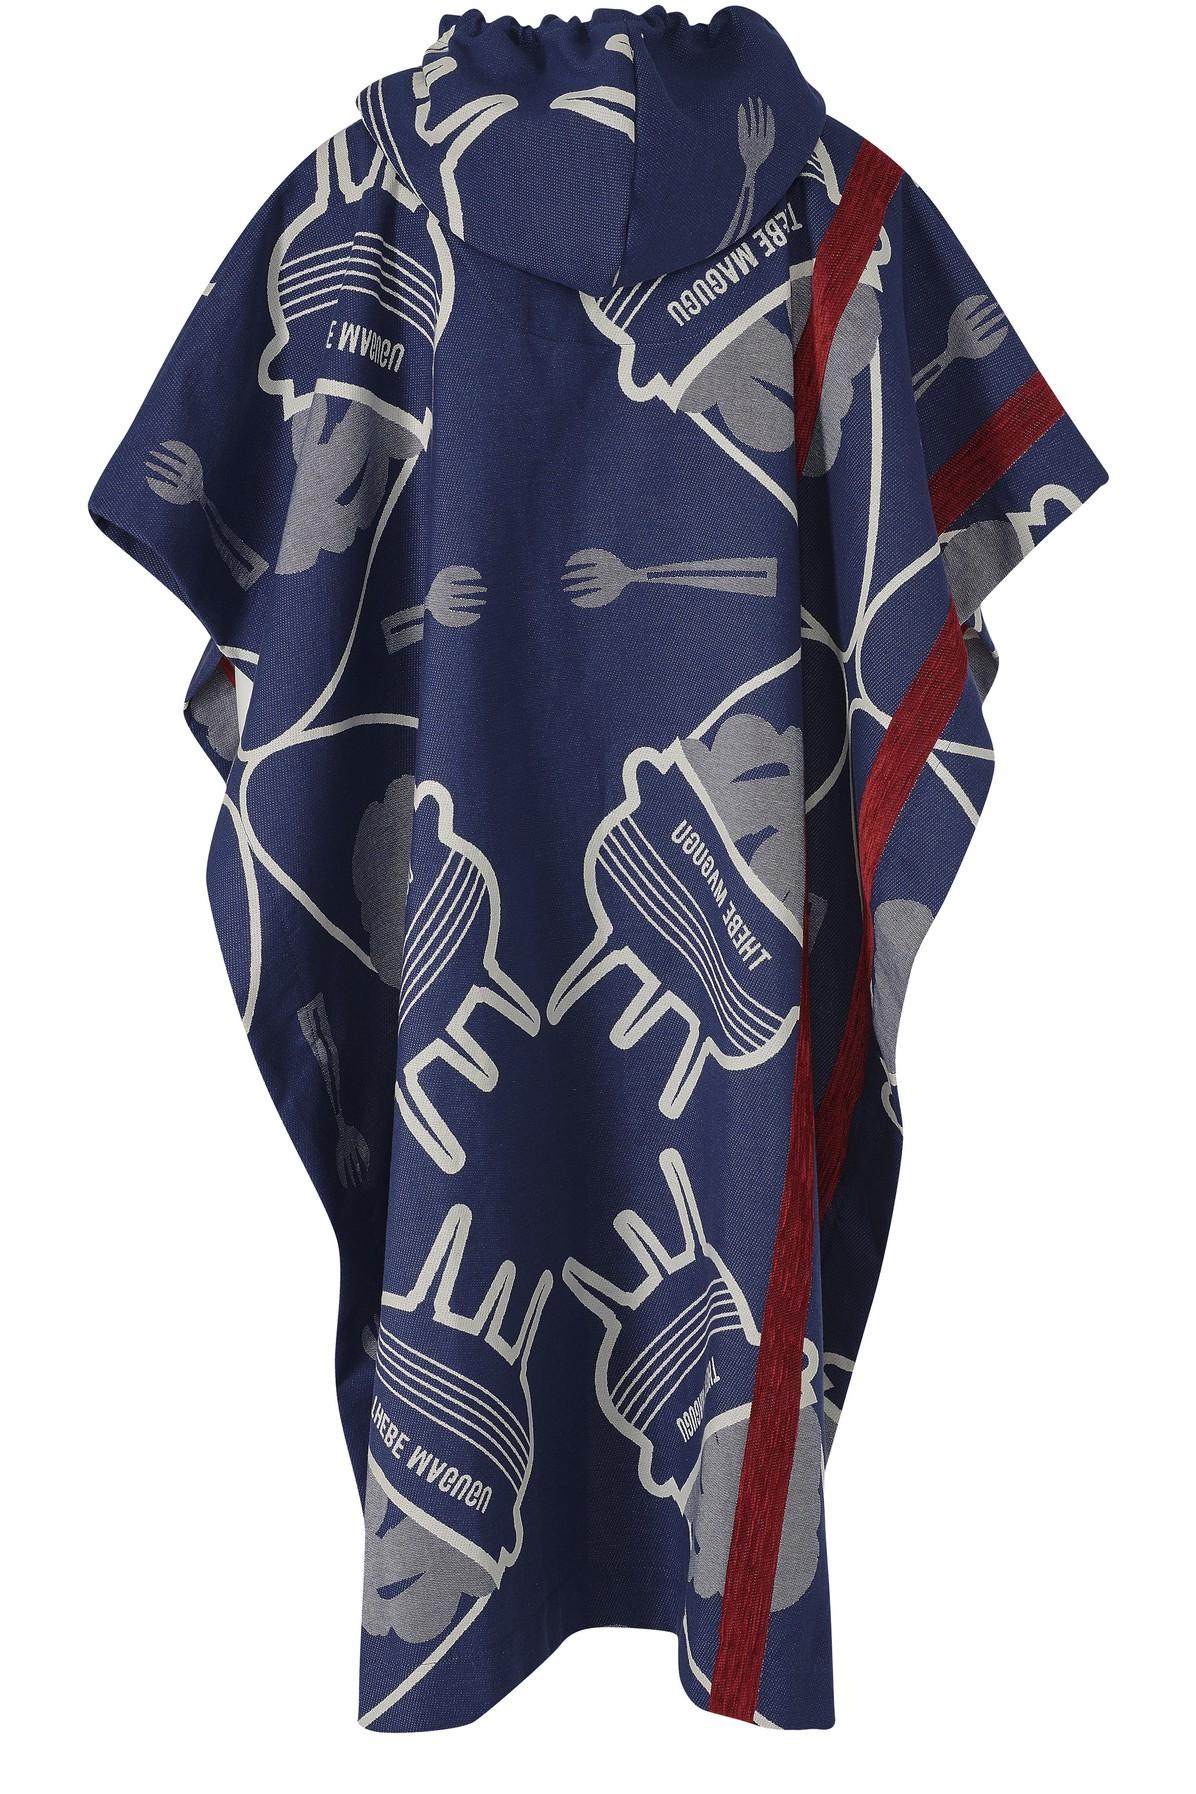 Thebe Magugu Poncho in Navy Cream White (Blue) for Men - Lyst